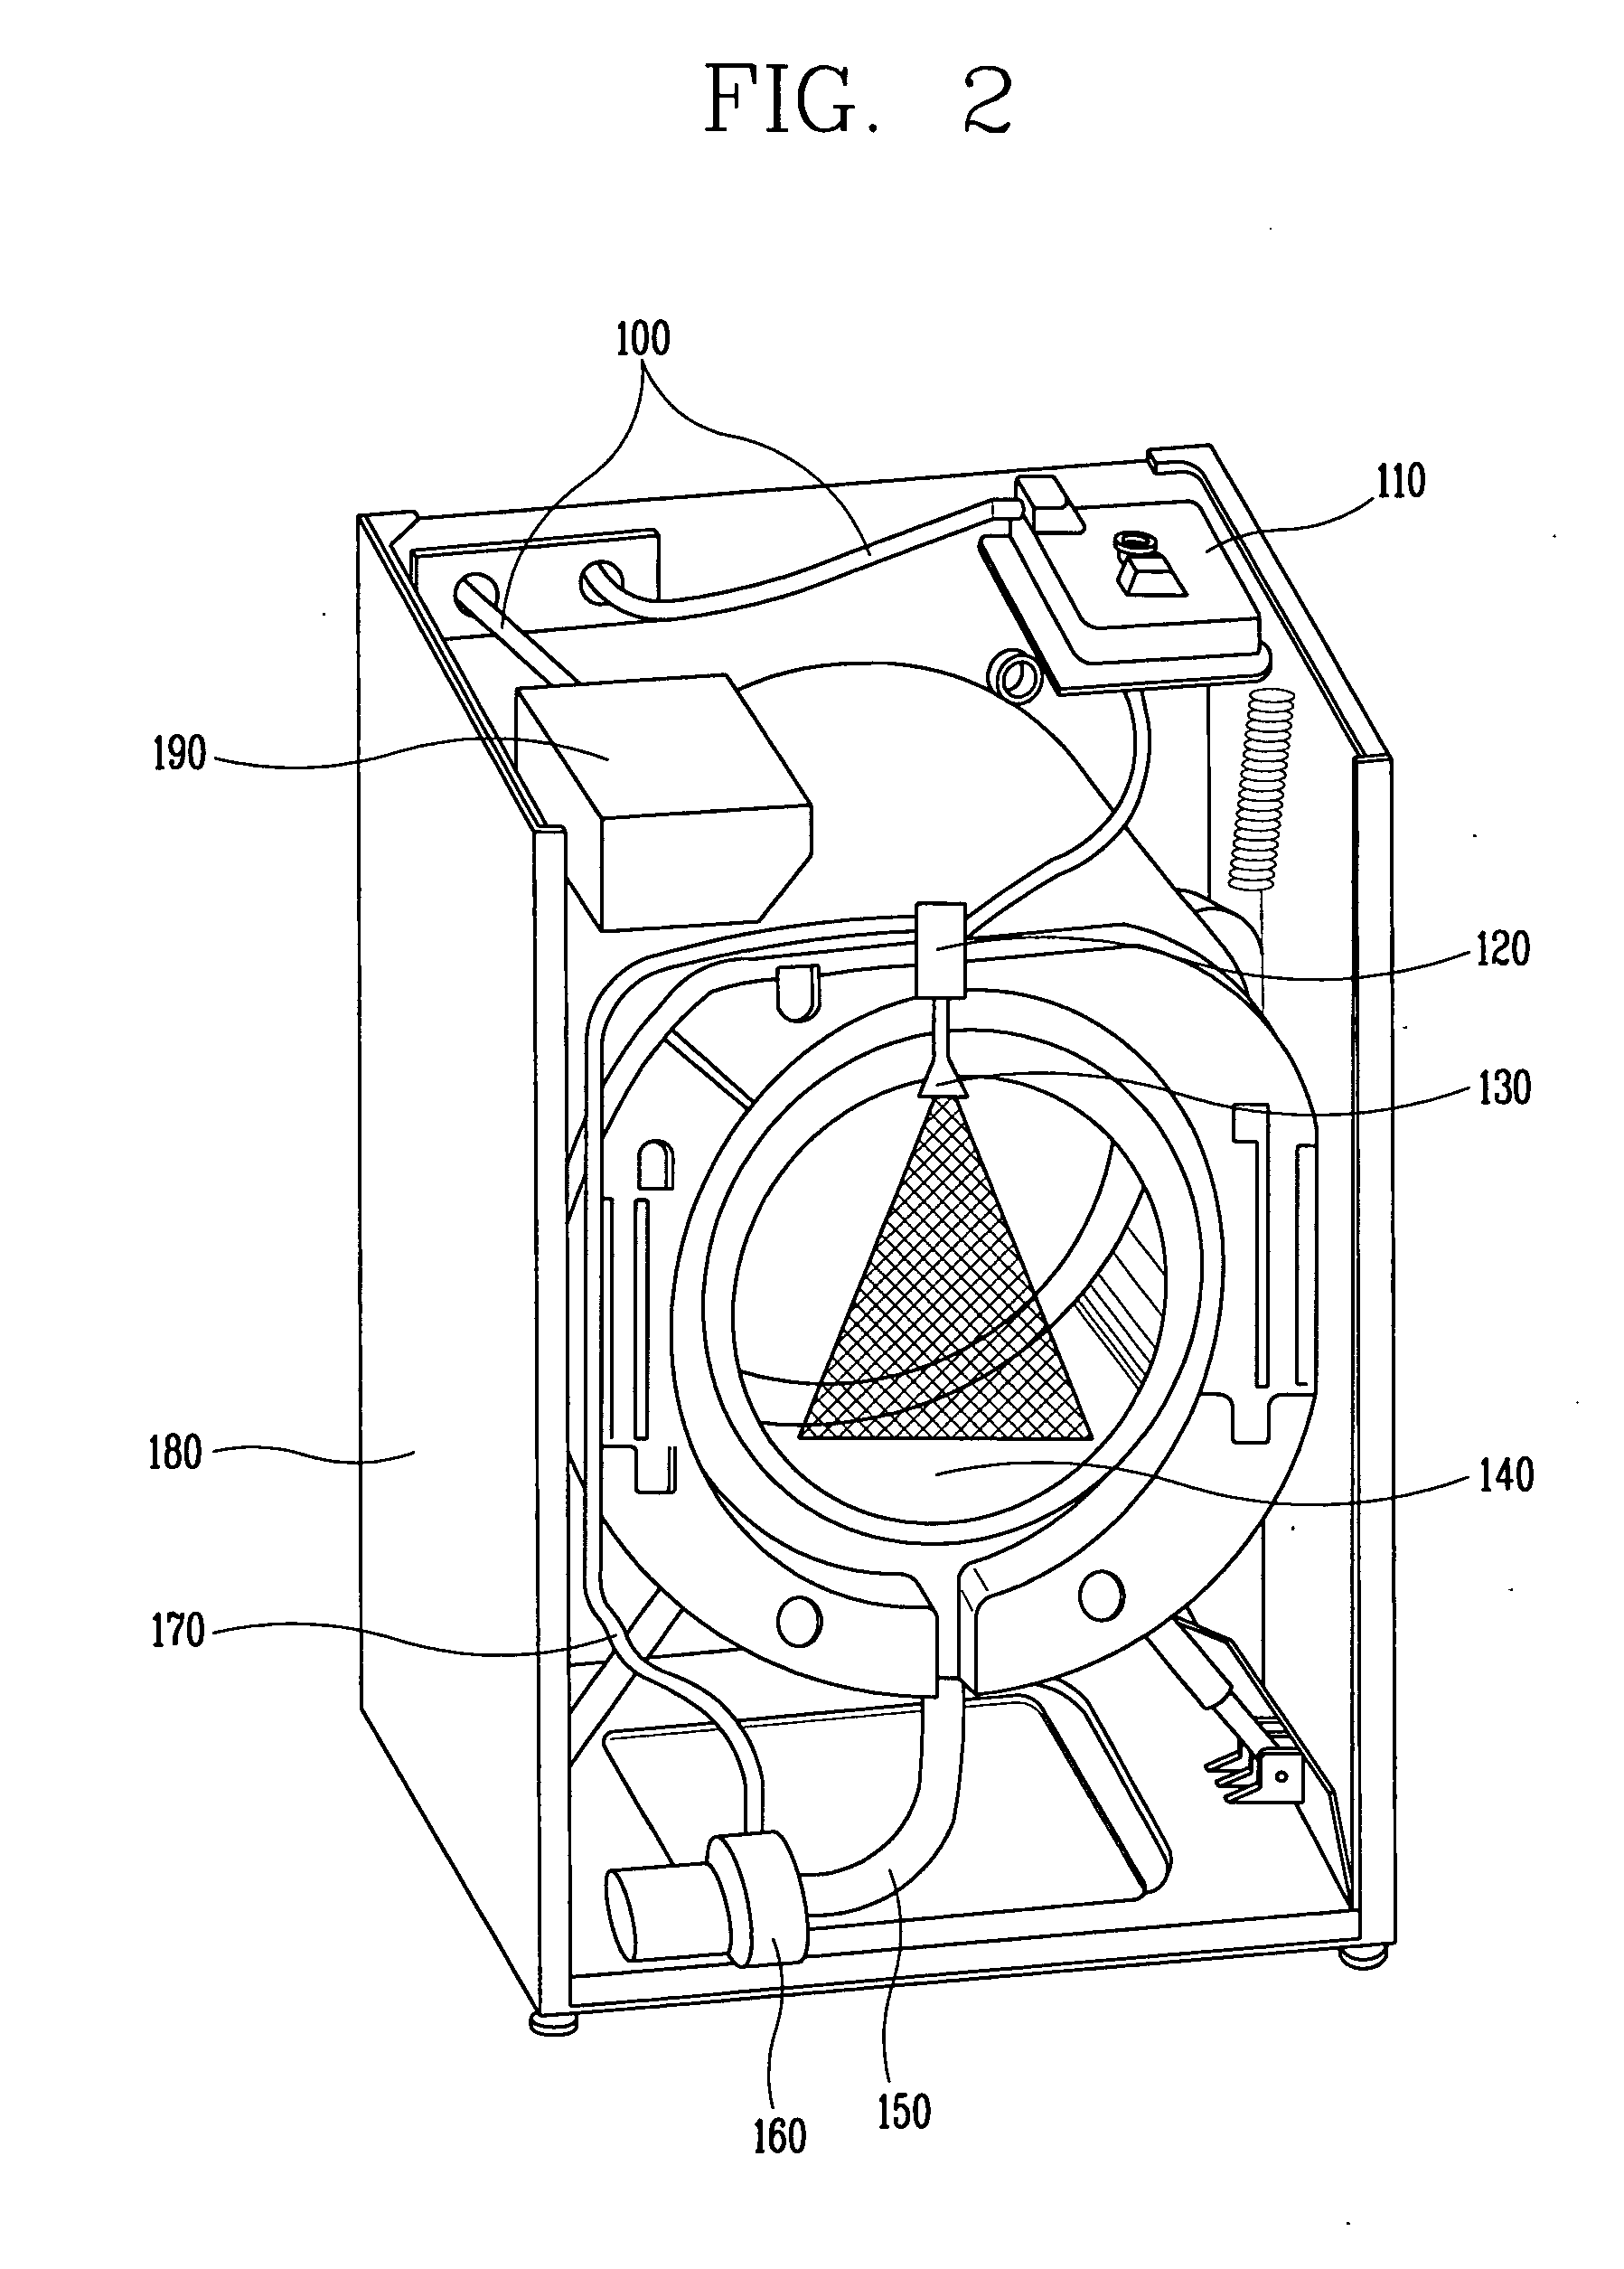 Method for smoothing wrinkles of laundry in washing machine